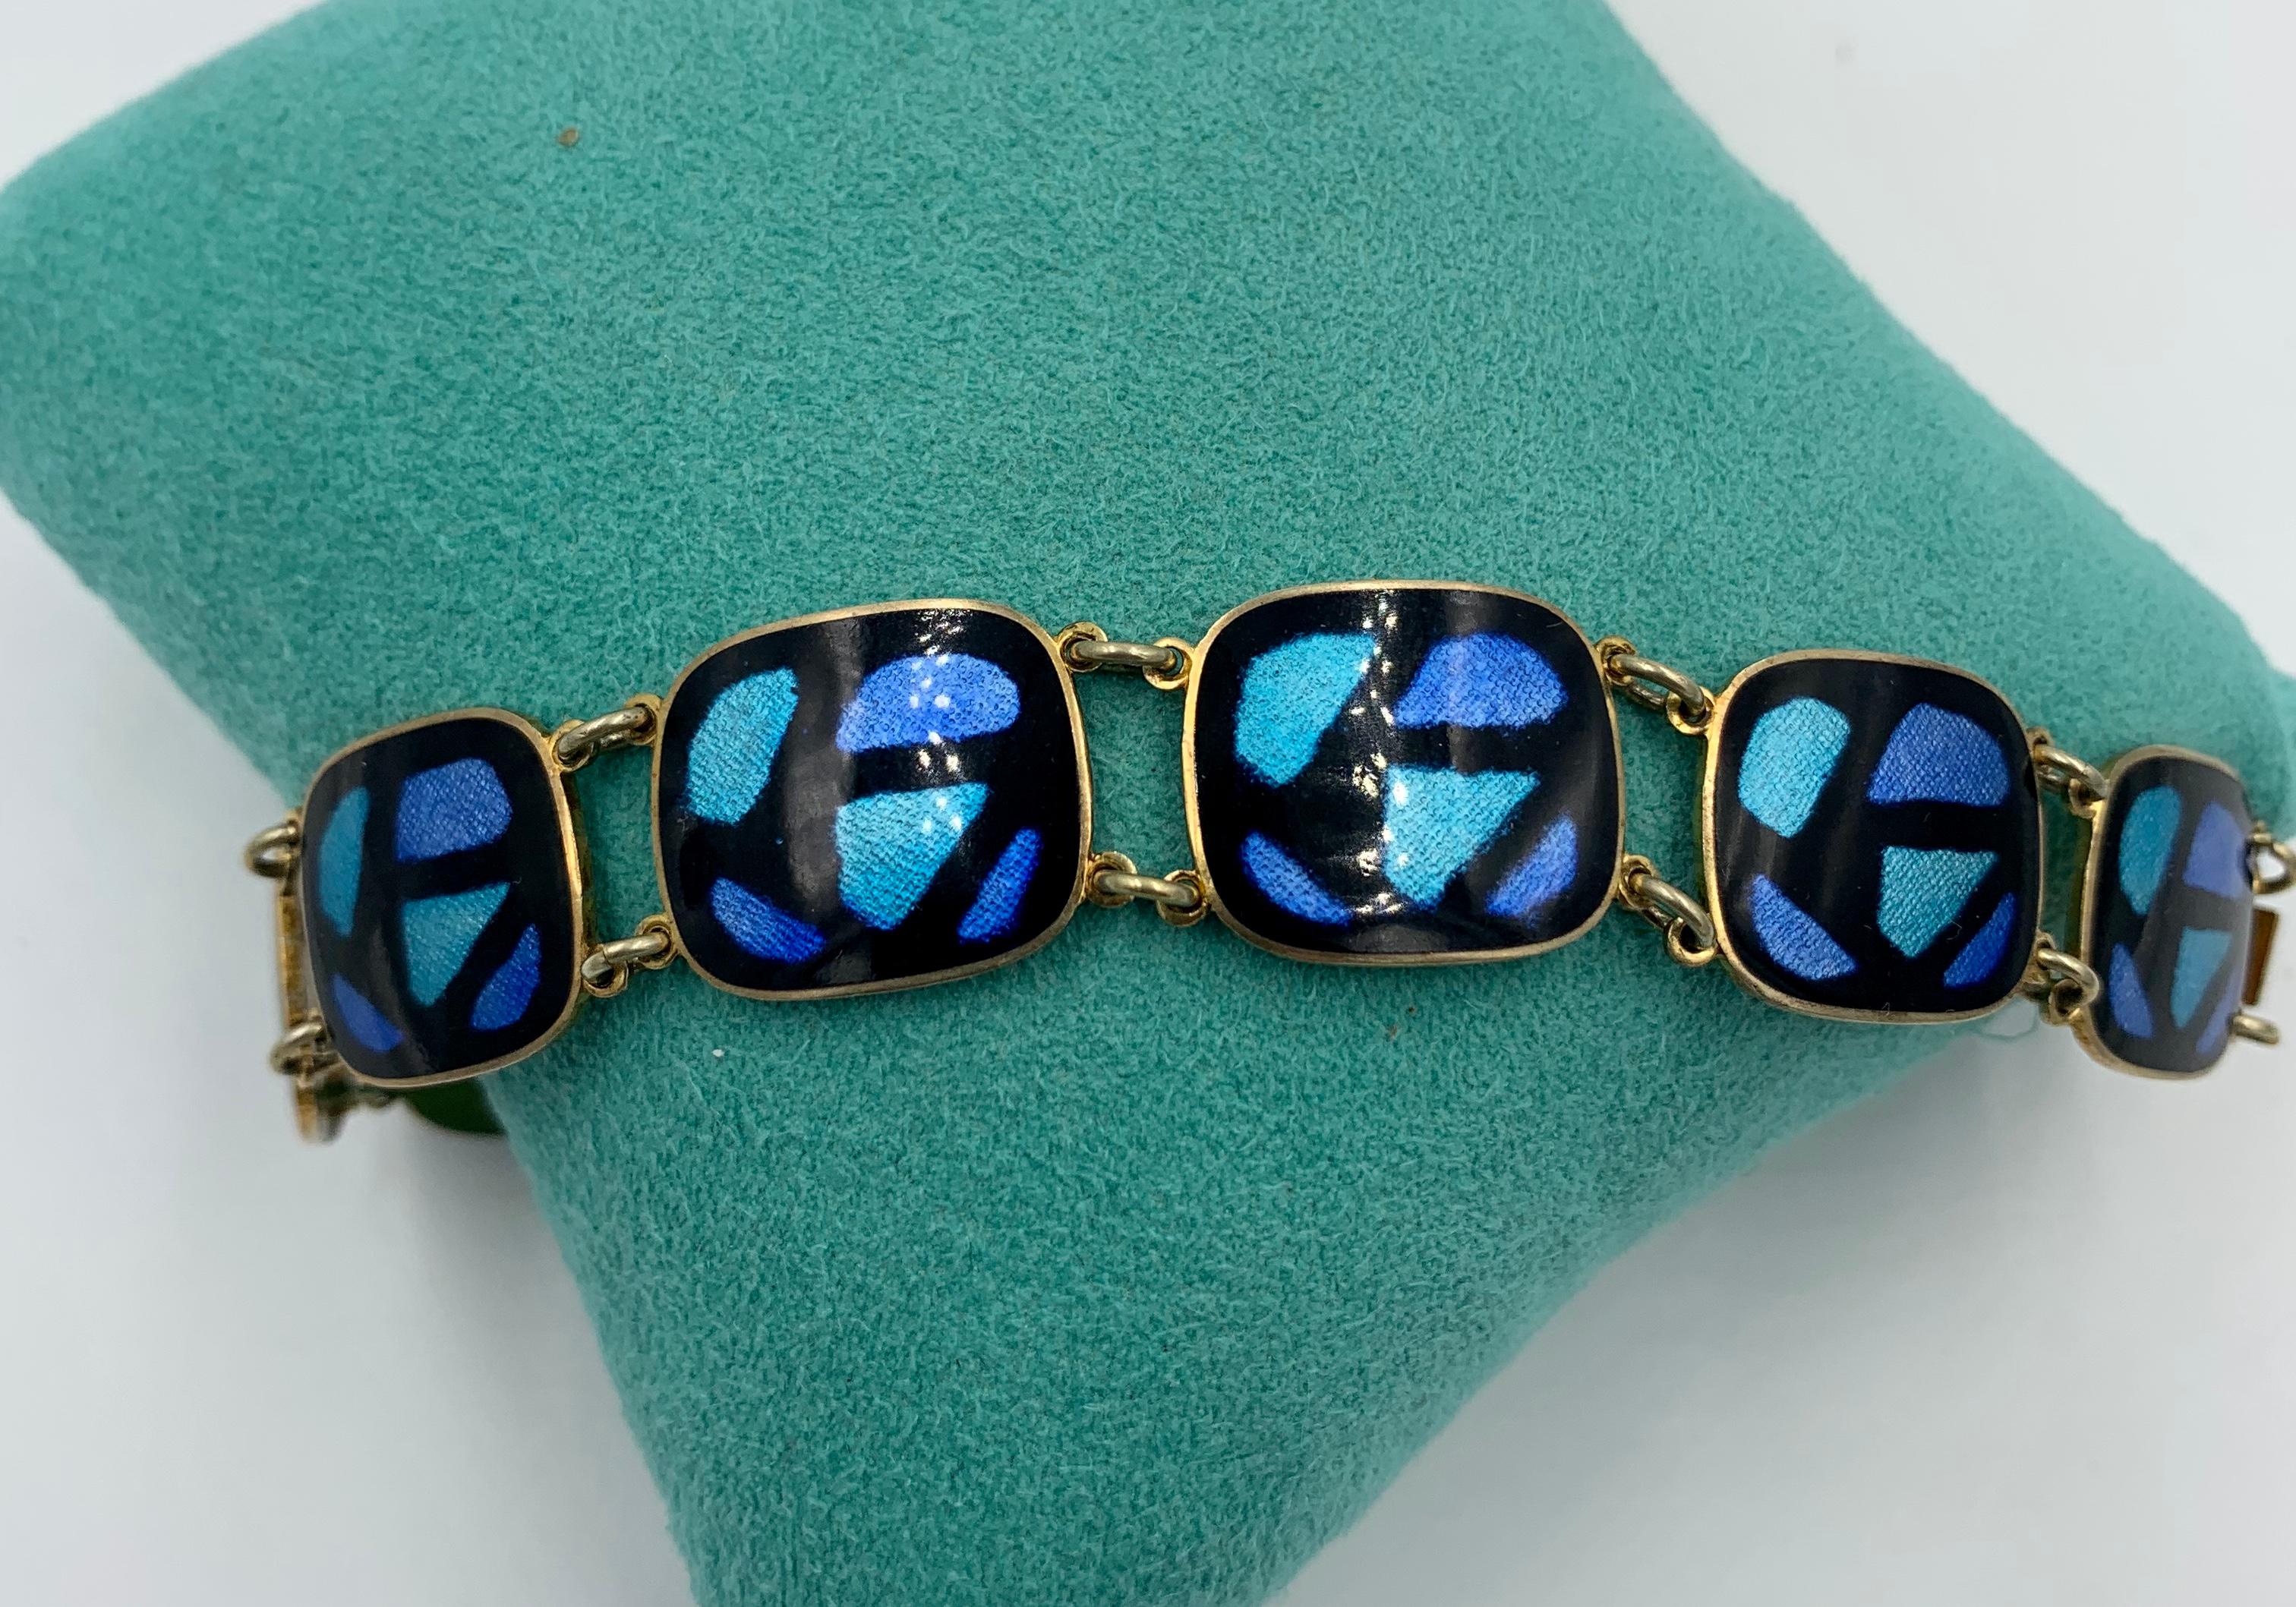 Exquisite Mid-Century Modern Bracelet and Earrings marked S.G.M., which I believe is the esteemed silversmith Stanley George Morris of England.  I love the stained glass window motif with gorgeous blue, aqua and purple guilloche enamel with the